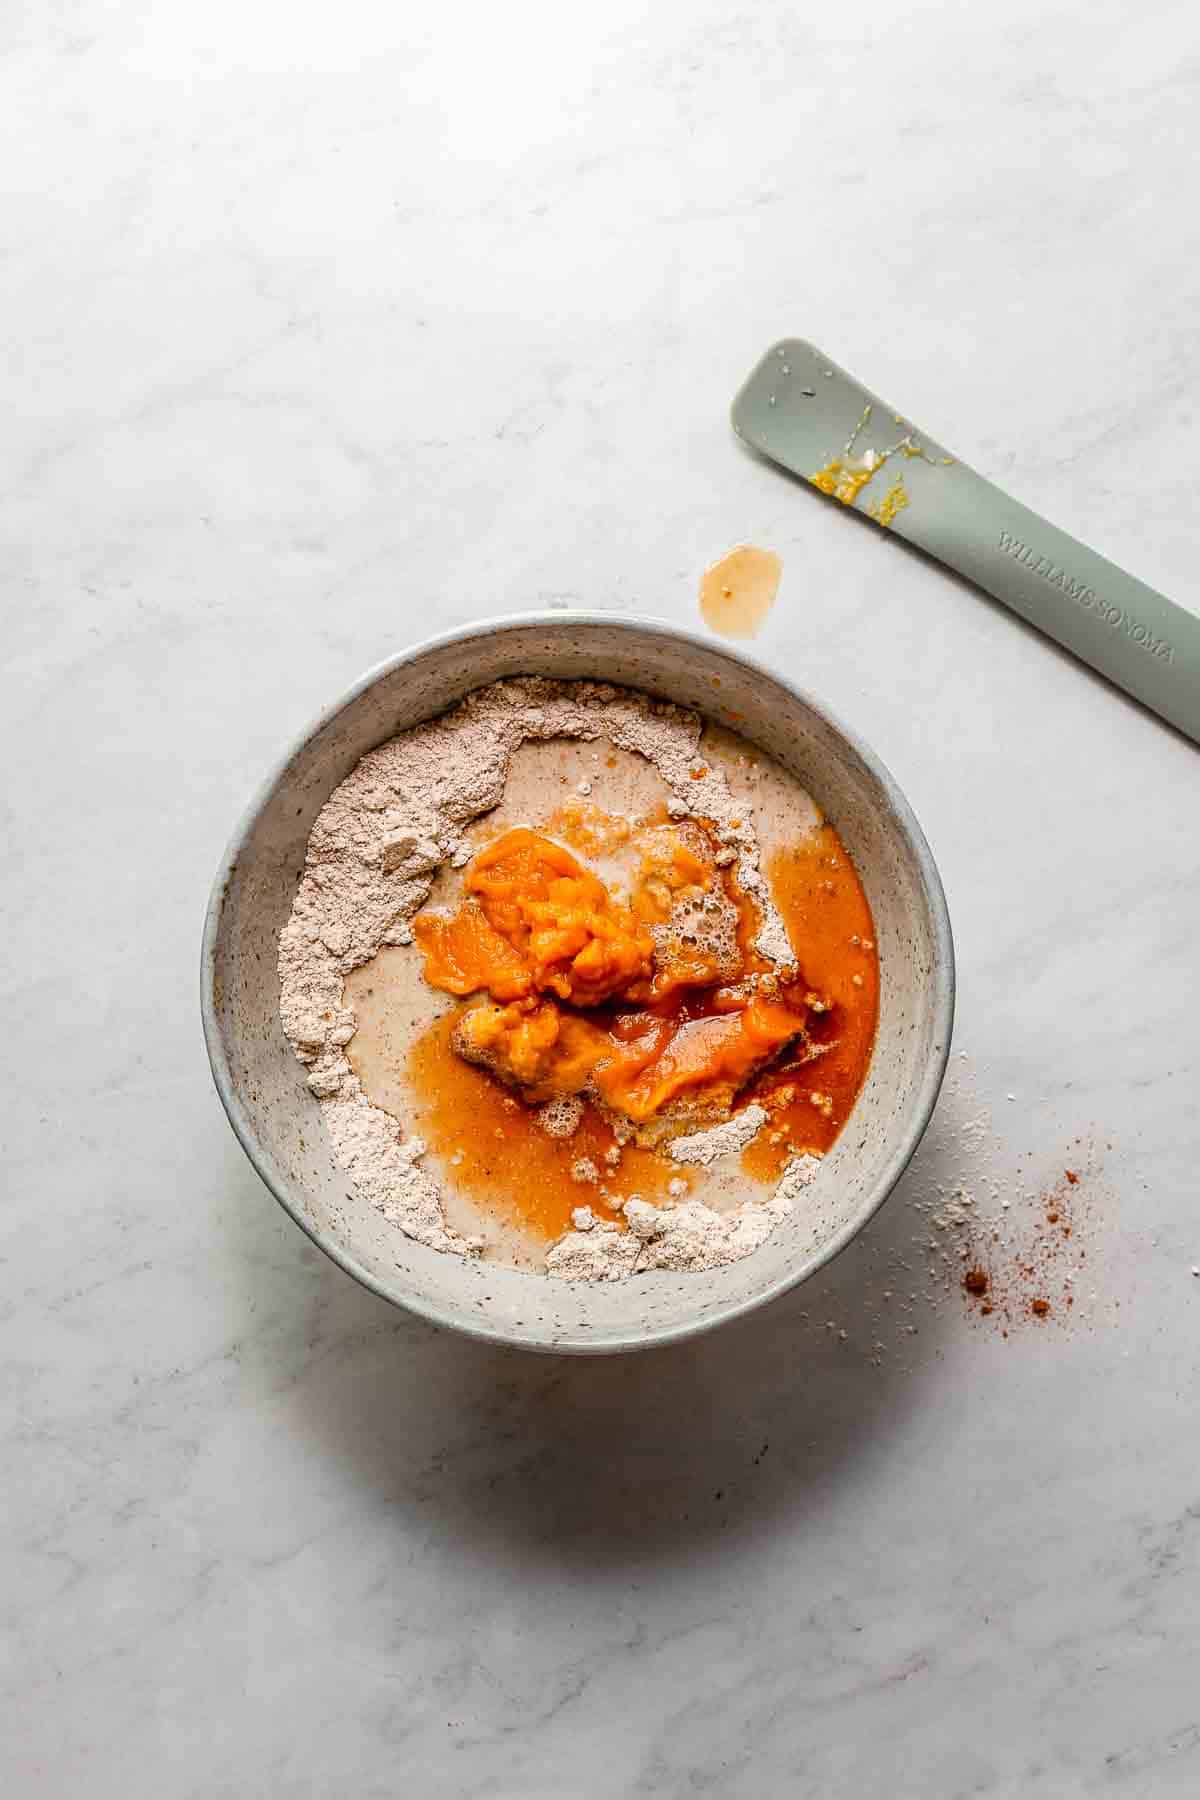 Vegan, gluten-free, oil-free baked pumpkin donut wet ingredients added to dry in a mixing bowl.